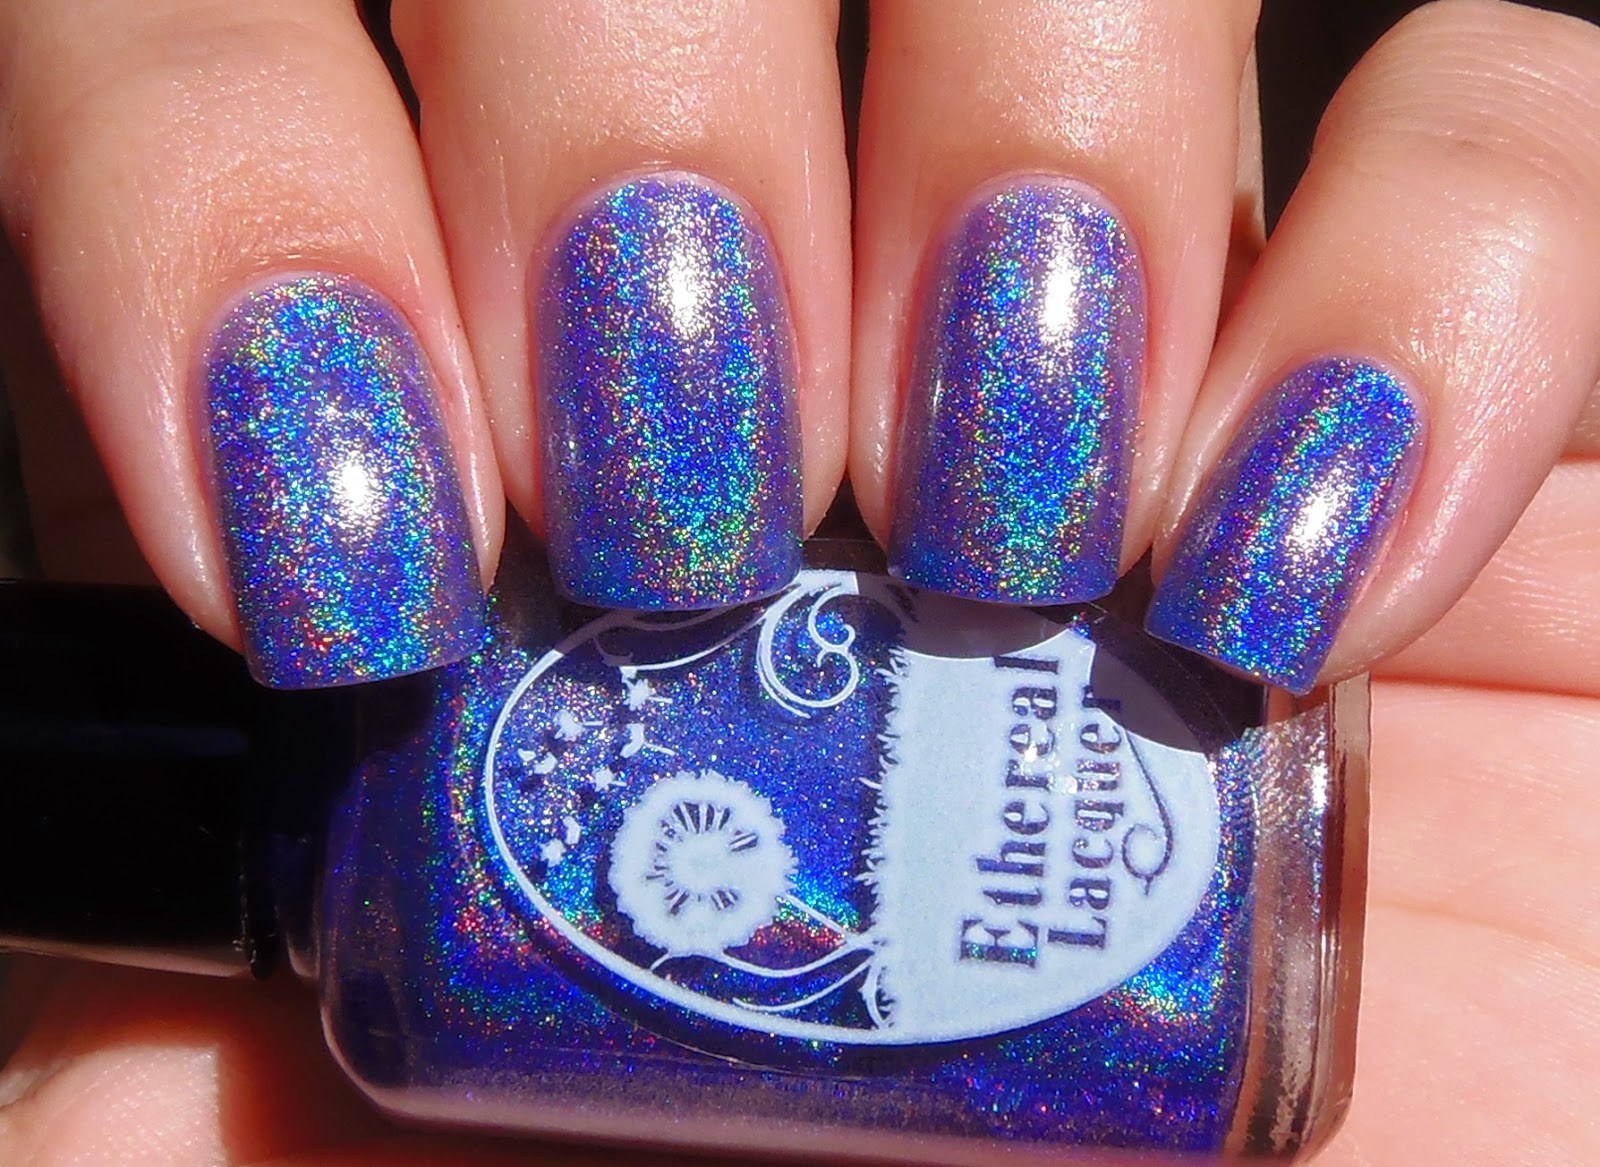 Sparkly Vernis: Ethereal Lacquer Enamored is a light-blue-leaning purple